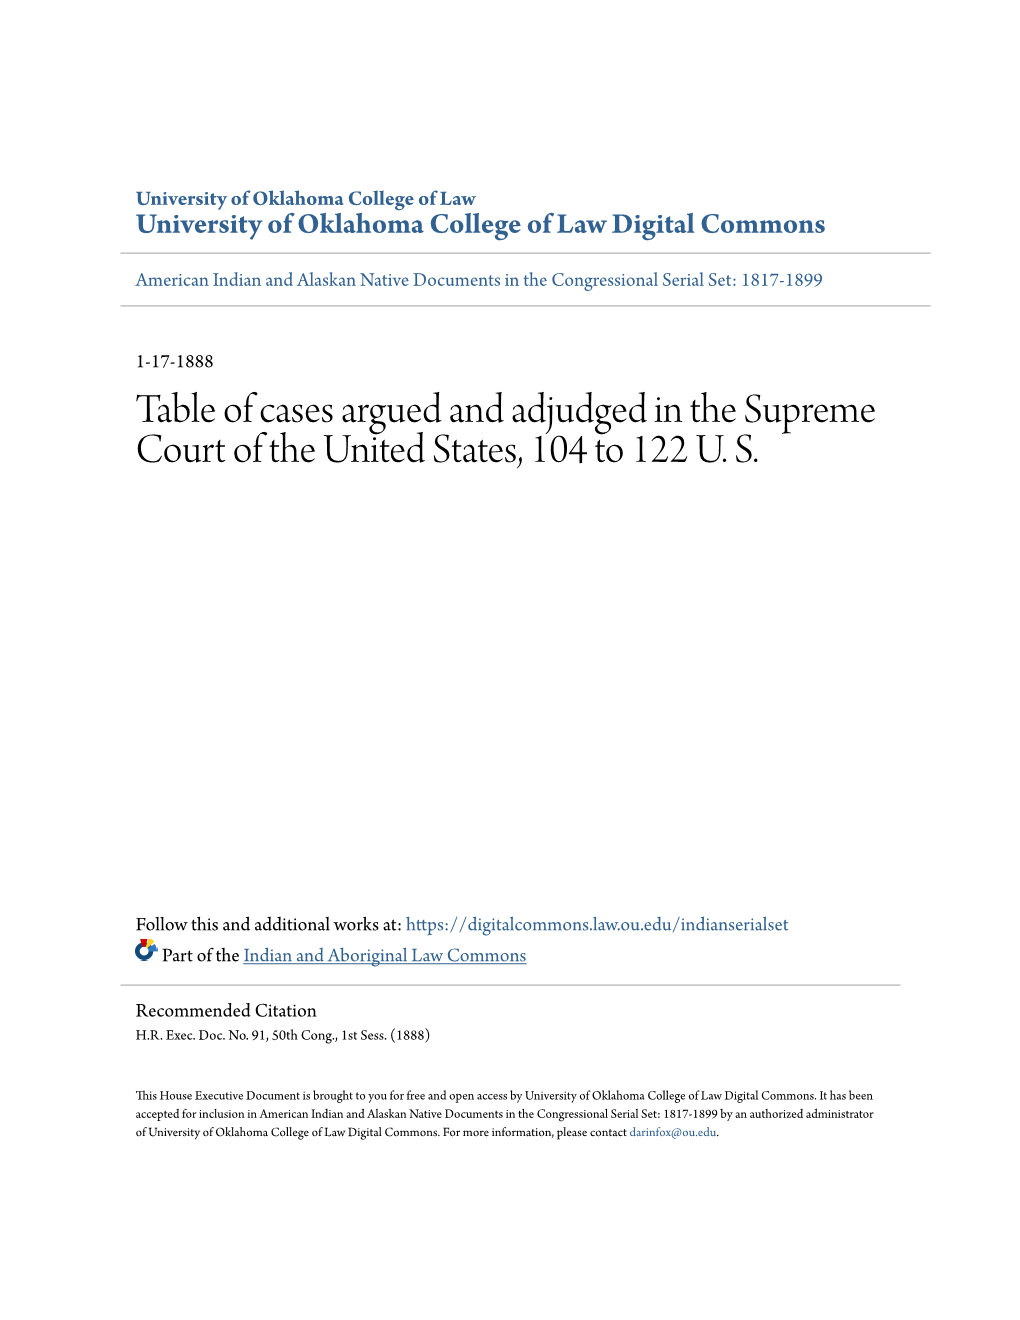 Table of Cases Argued and Adjudged in the Supreme Court of the United States, 104 to 122 U